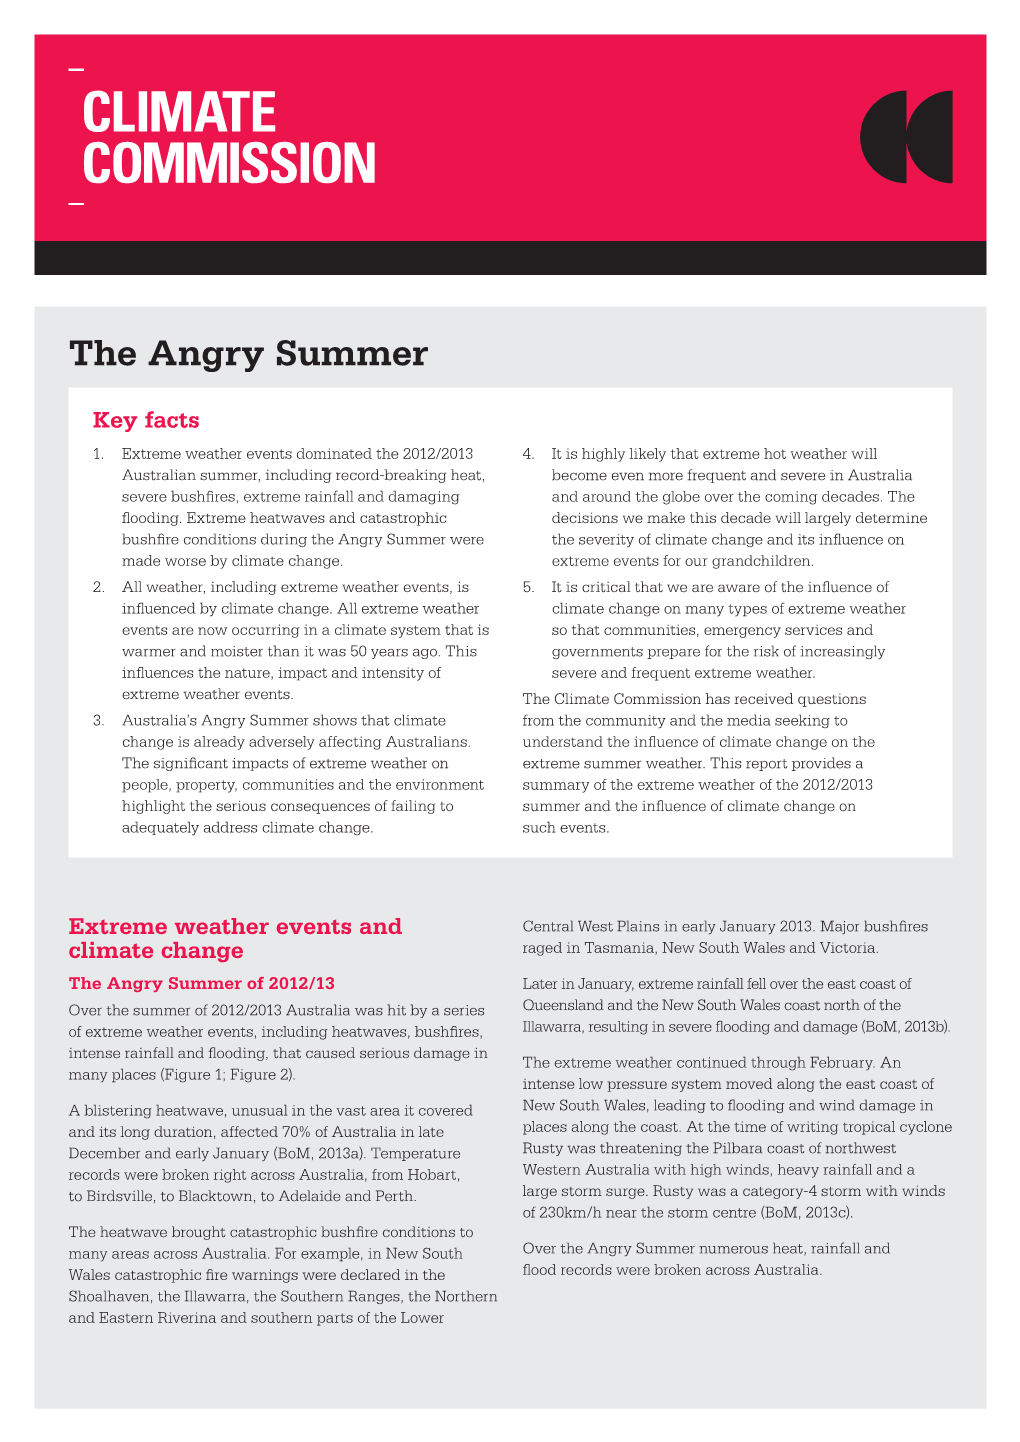 The Angry Summer